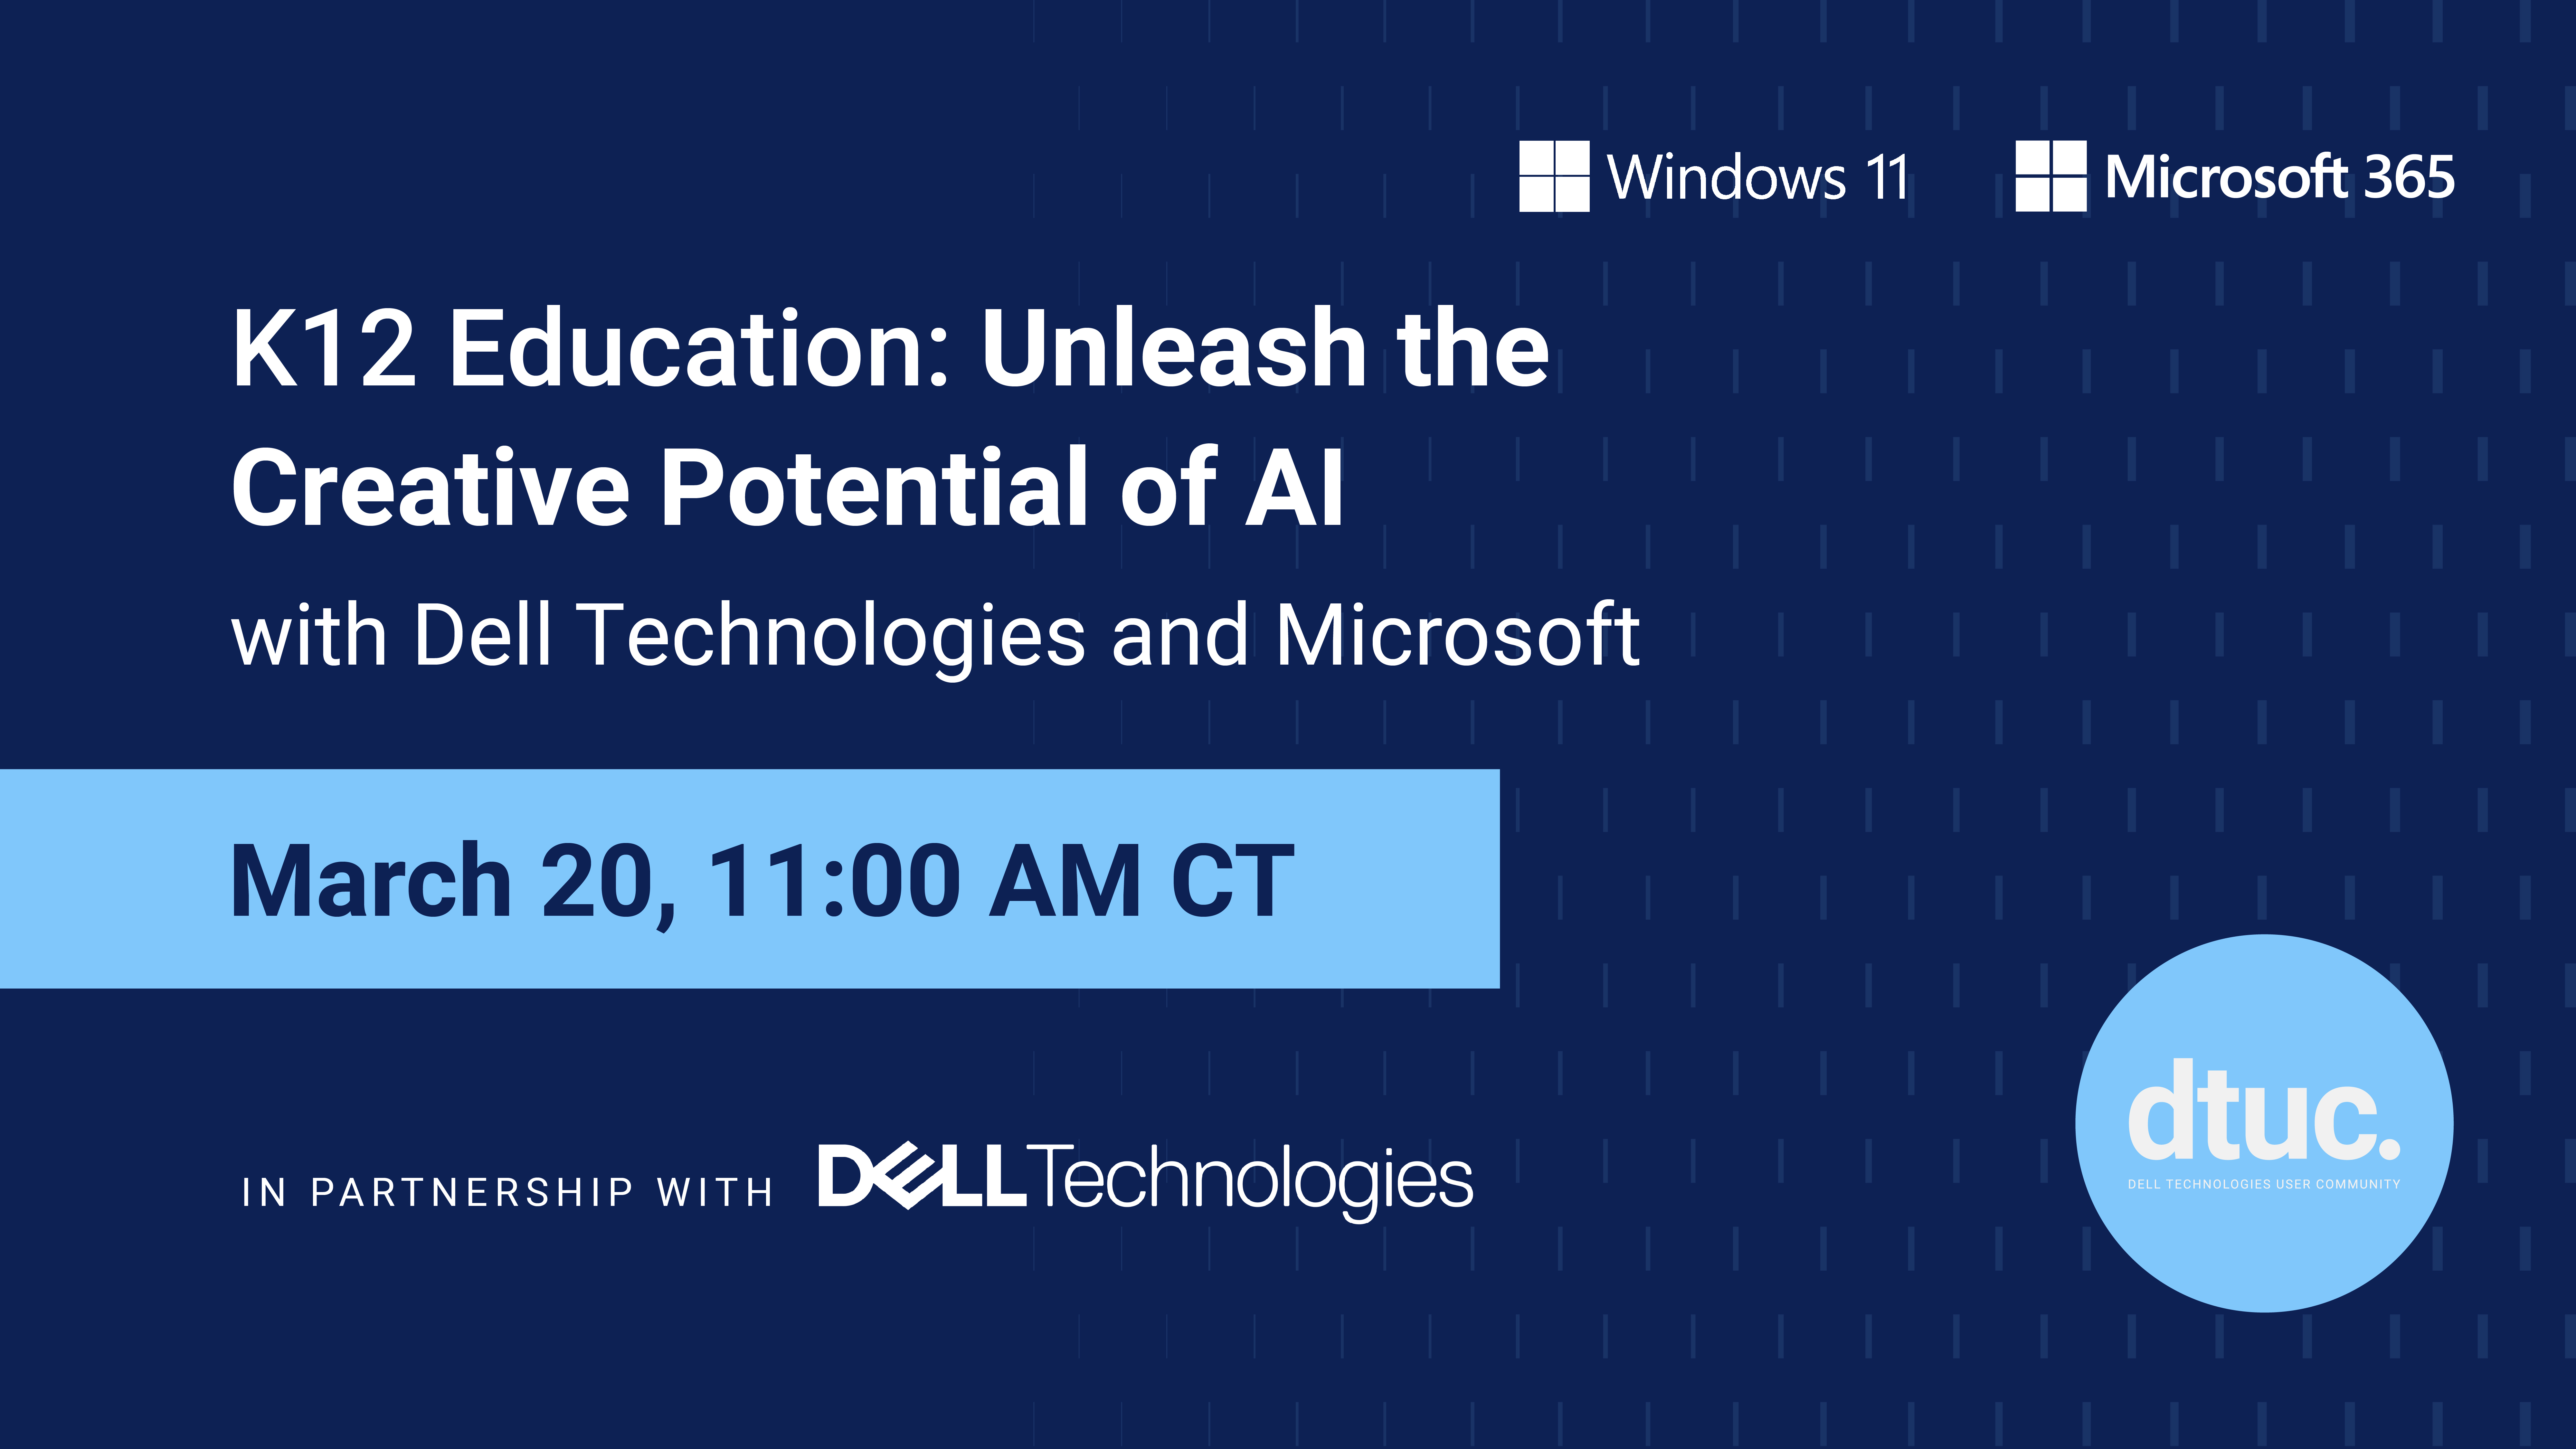 K12: Education: Unleash the Creative Potential of AI with Dell Technologies and Microsoft